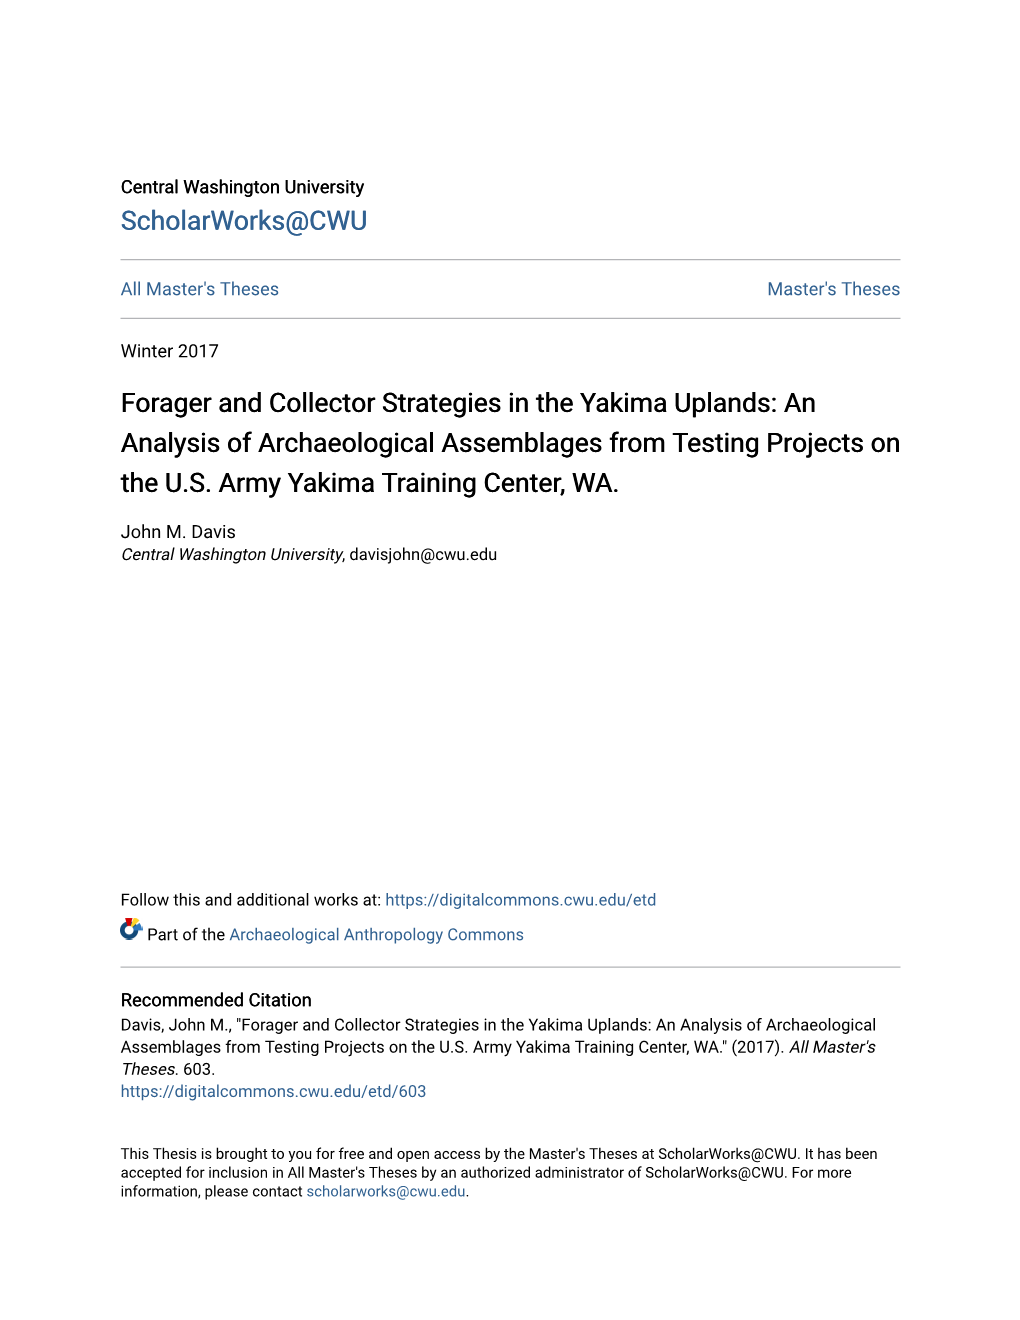 Forager and Collector Strategies in the Yakima Uplands: an Analysis of Archaeological Assemblages from Testing Projects on the U.S